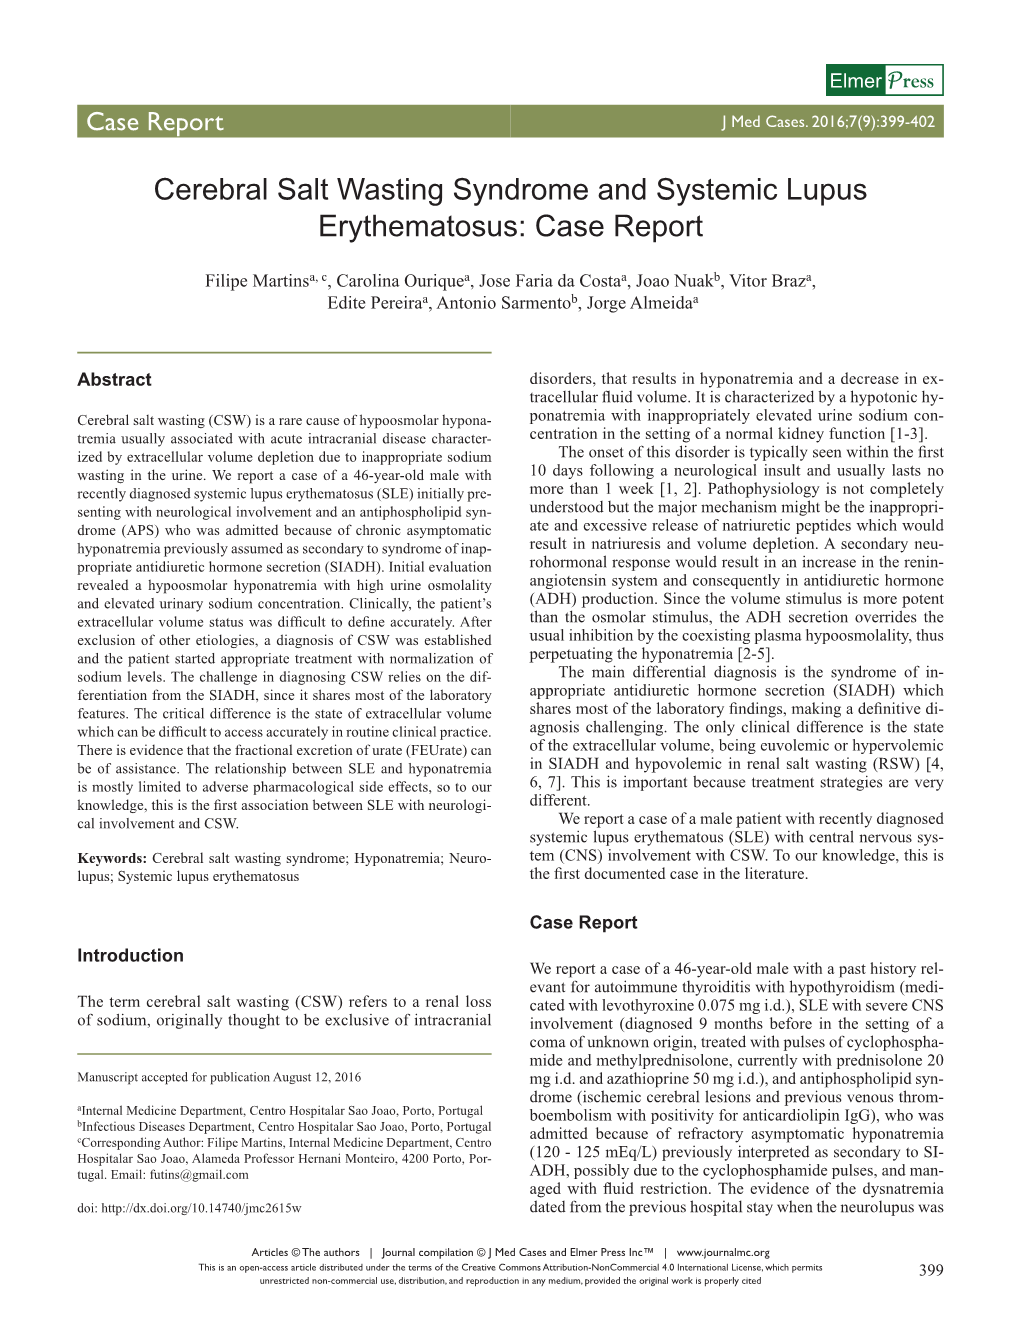 Cerebral Salt Wasting Syndrome and Systemic Lupus Erythematosus: Case Report